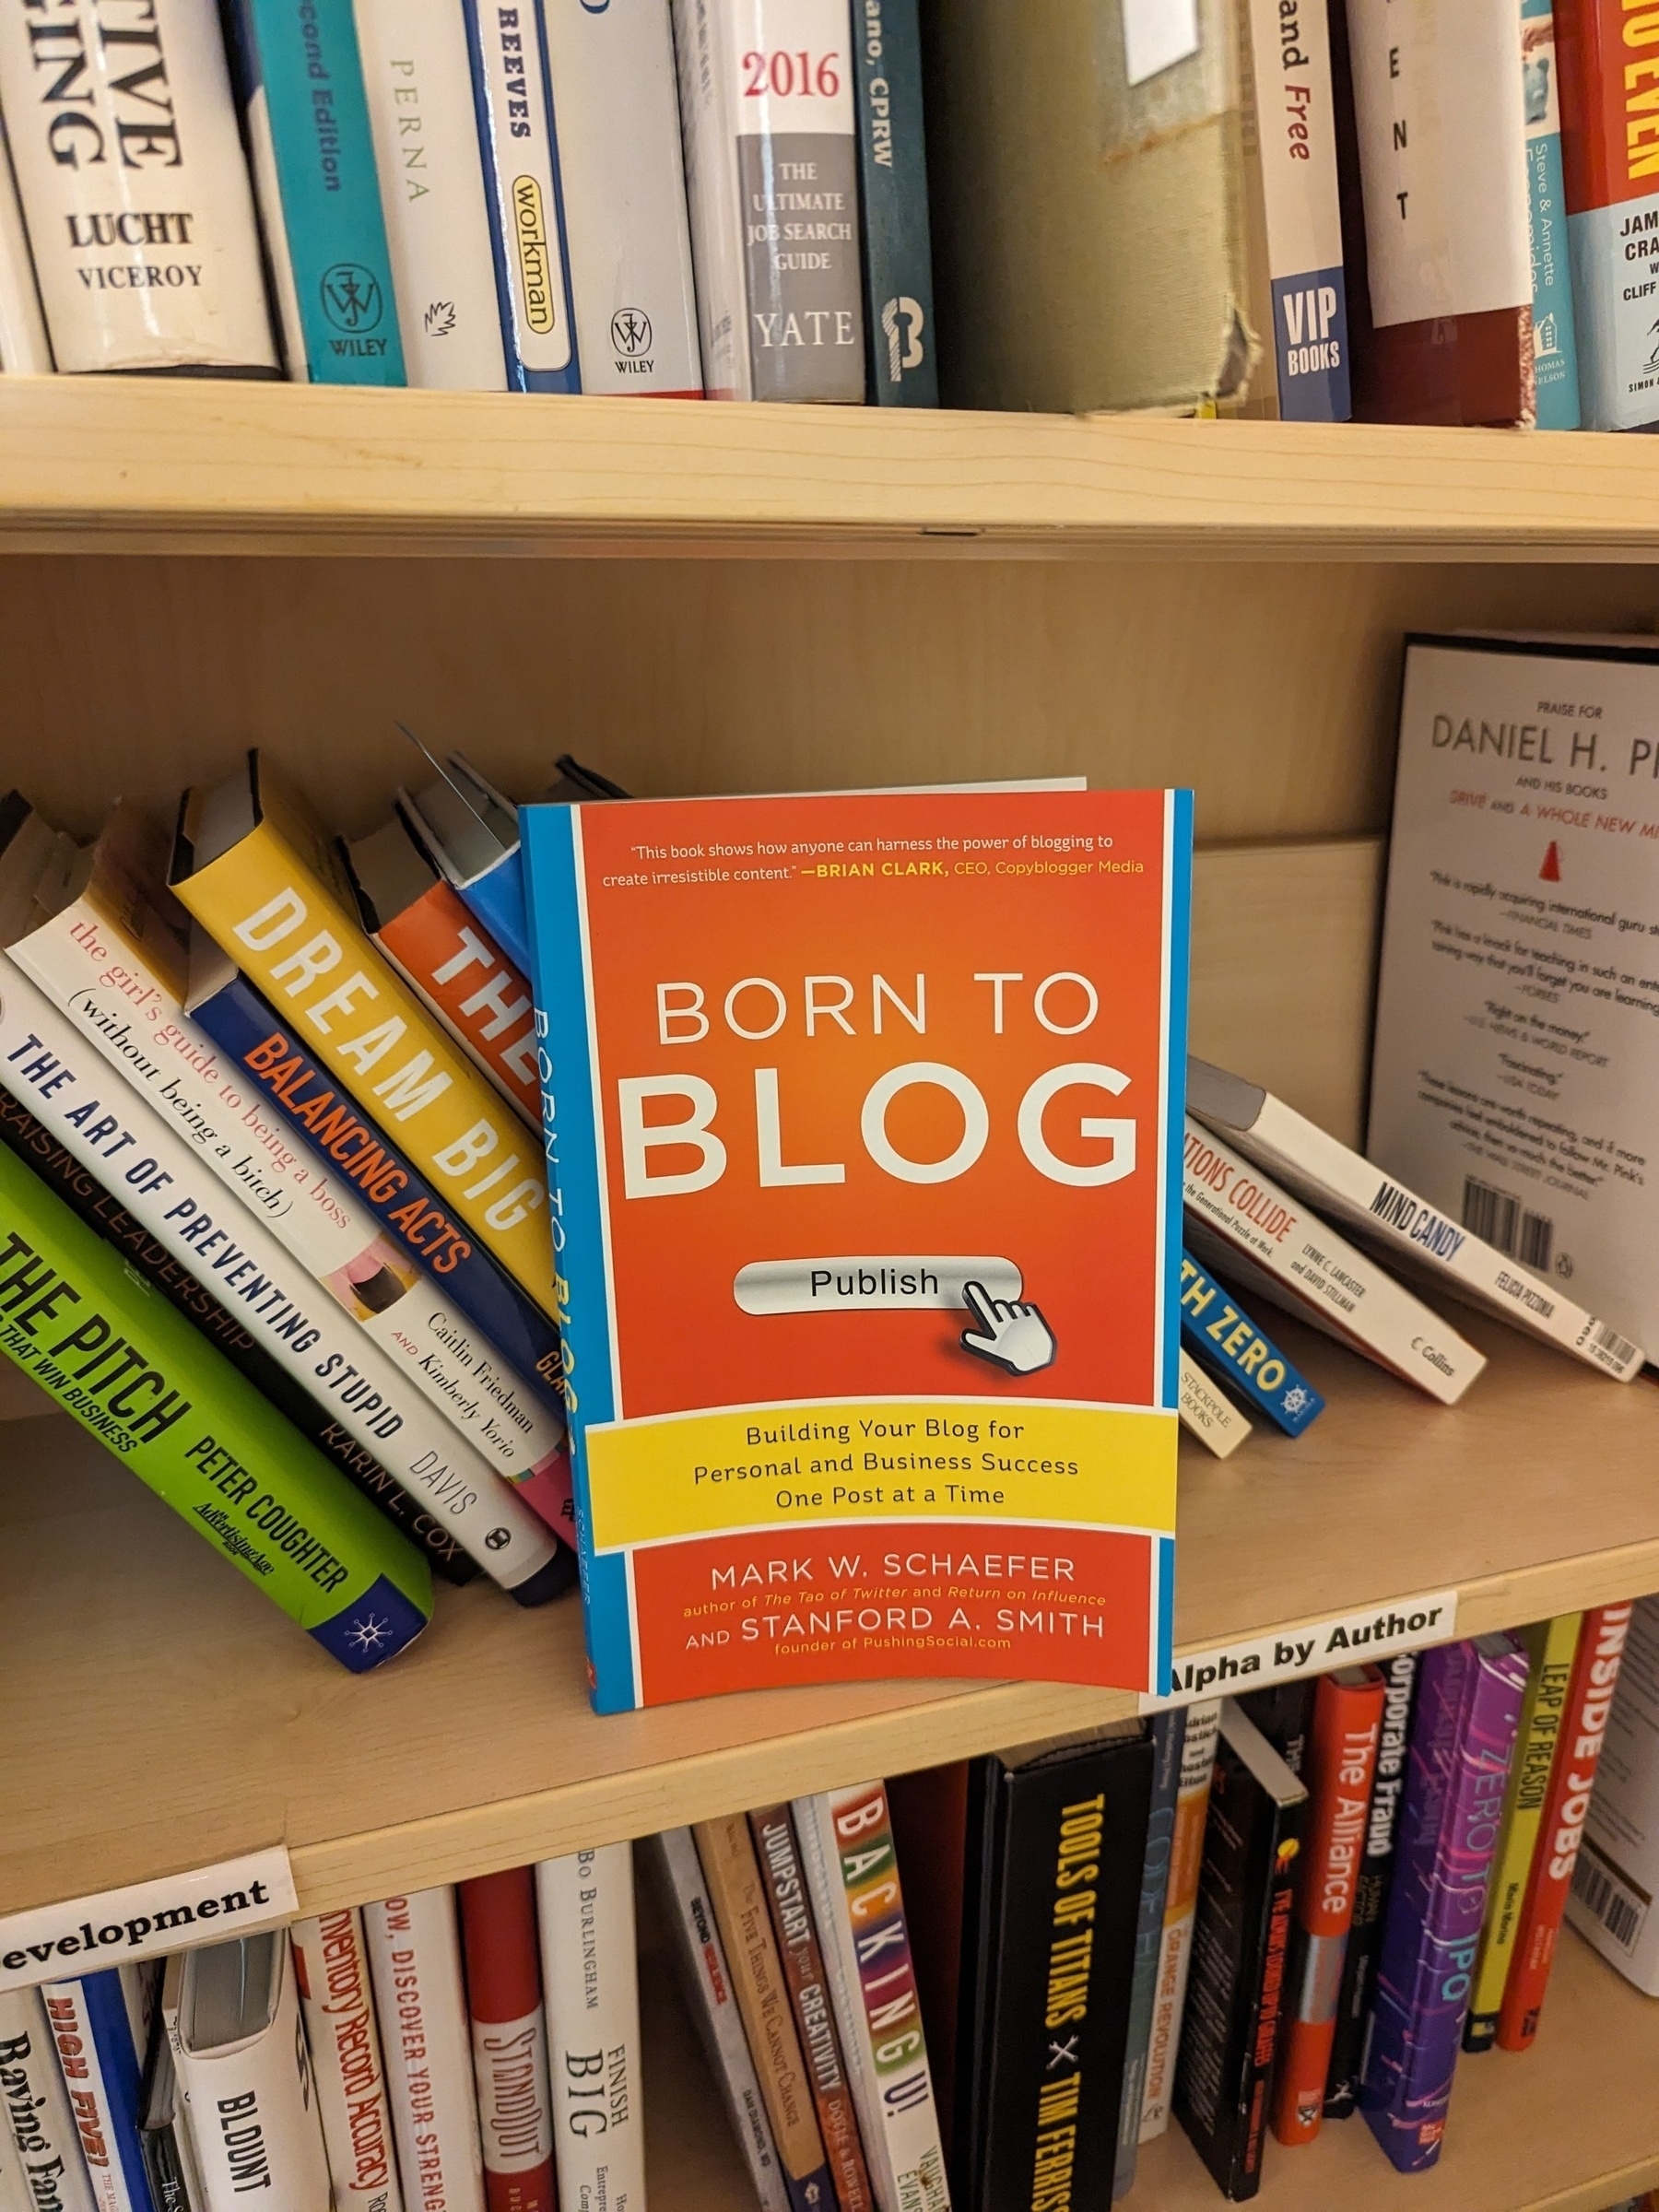 A book titled Born to Blog sits turned outward on a bookshelf in front of other books.